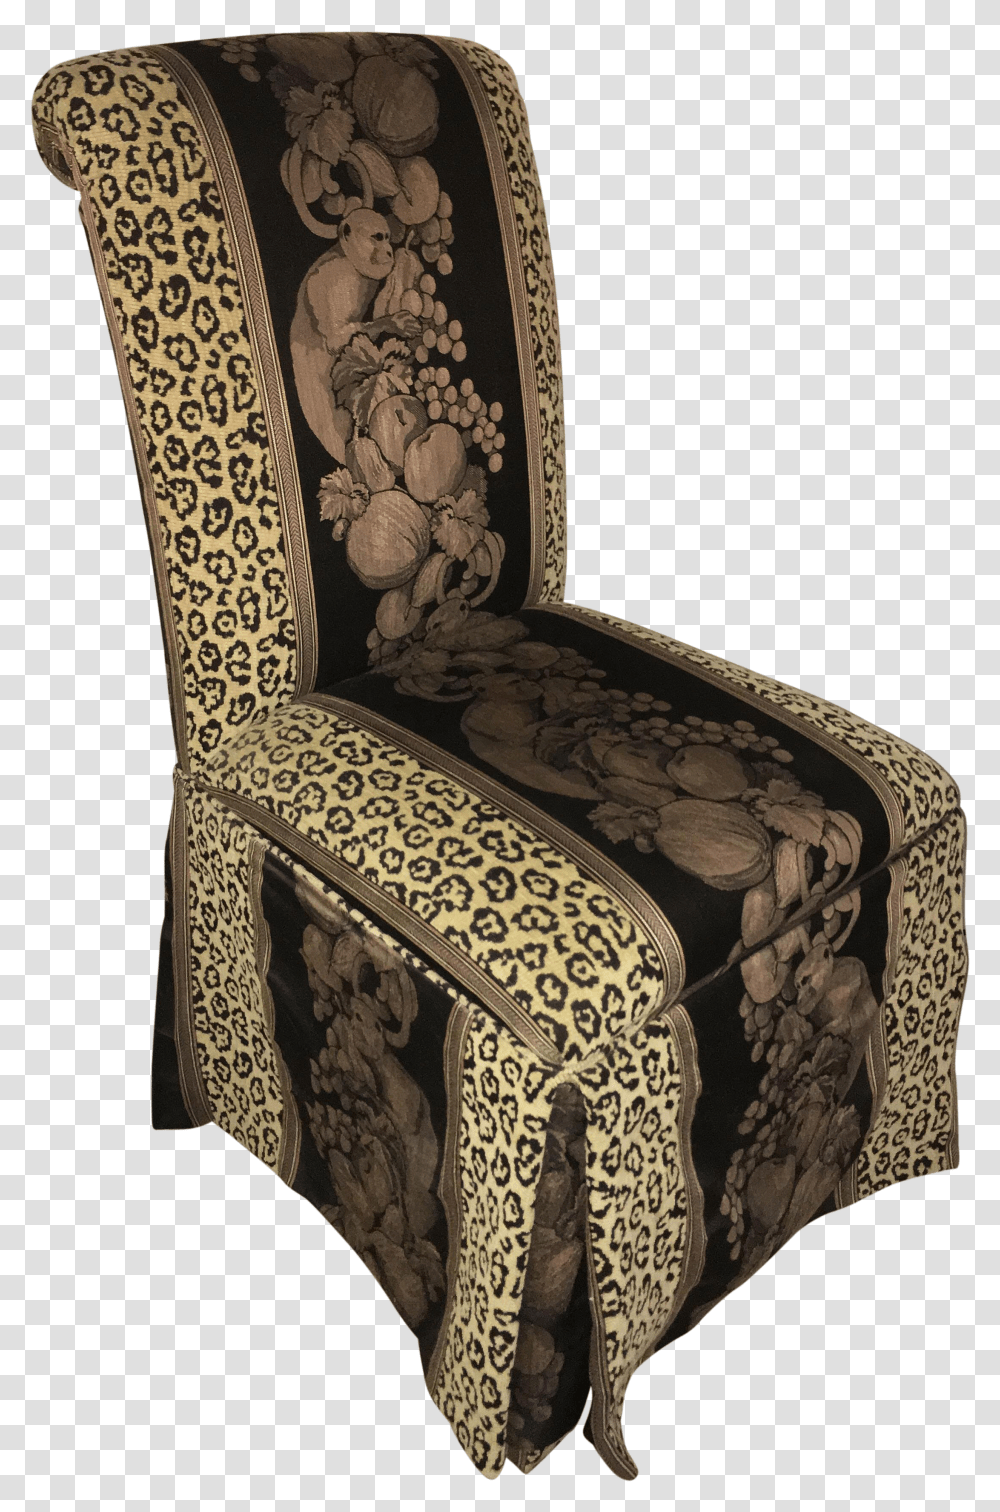 Safari Cheetah Print Side Chair With Monkey Details Recliner Transparent Png